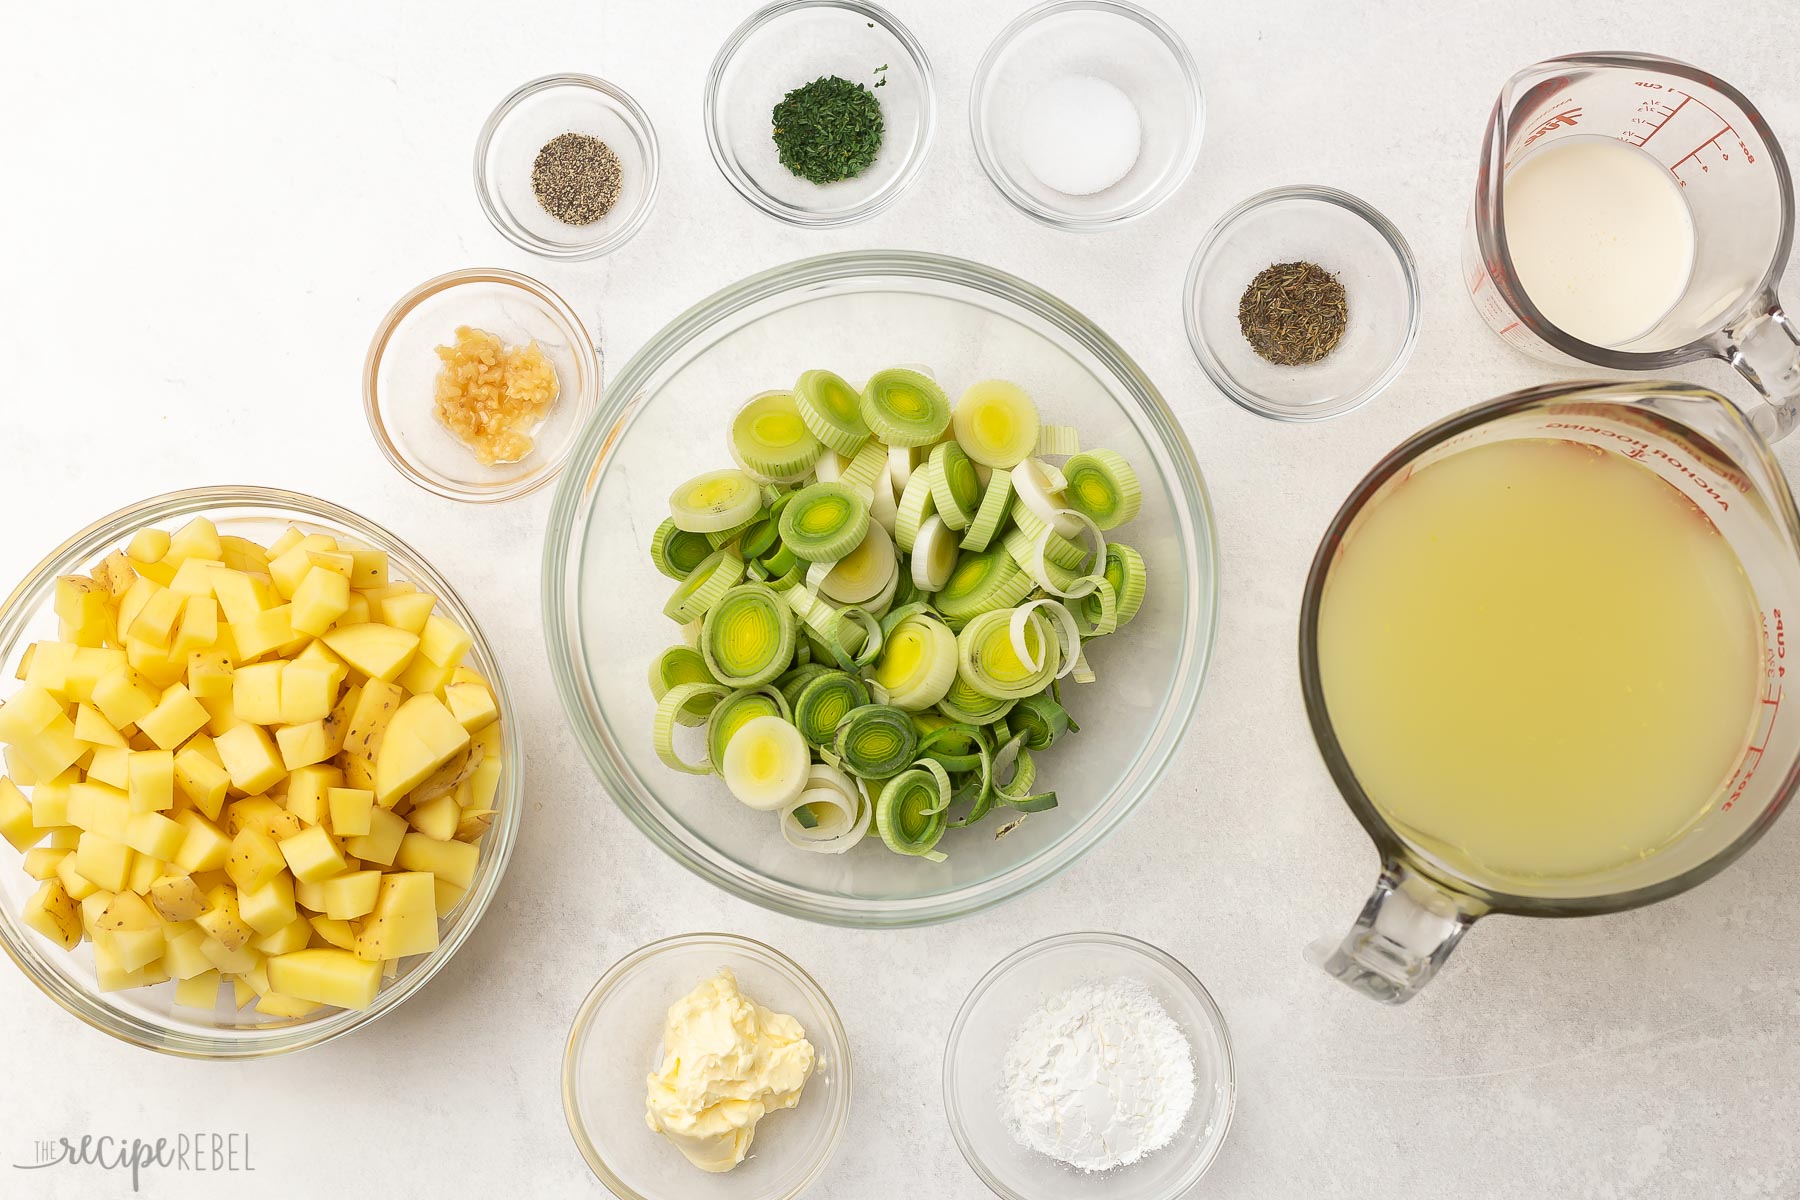 Overhead view of potato leek soup ingredients in glass bowls.